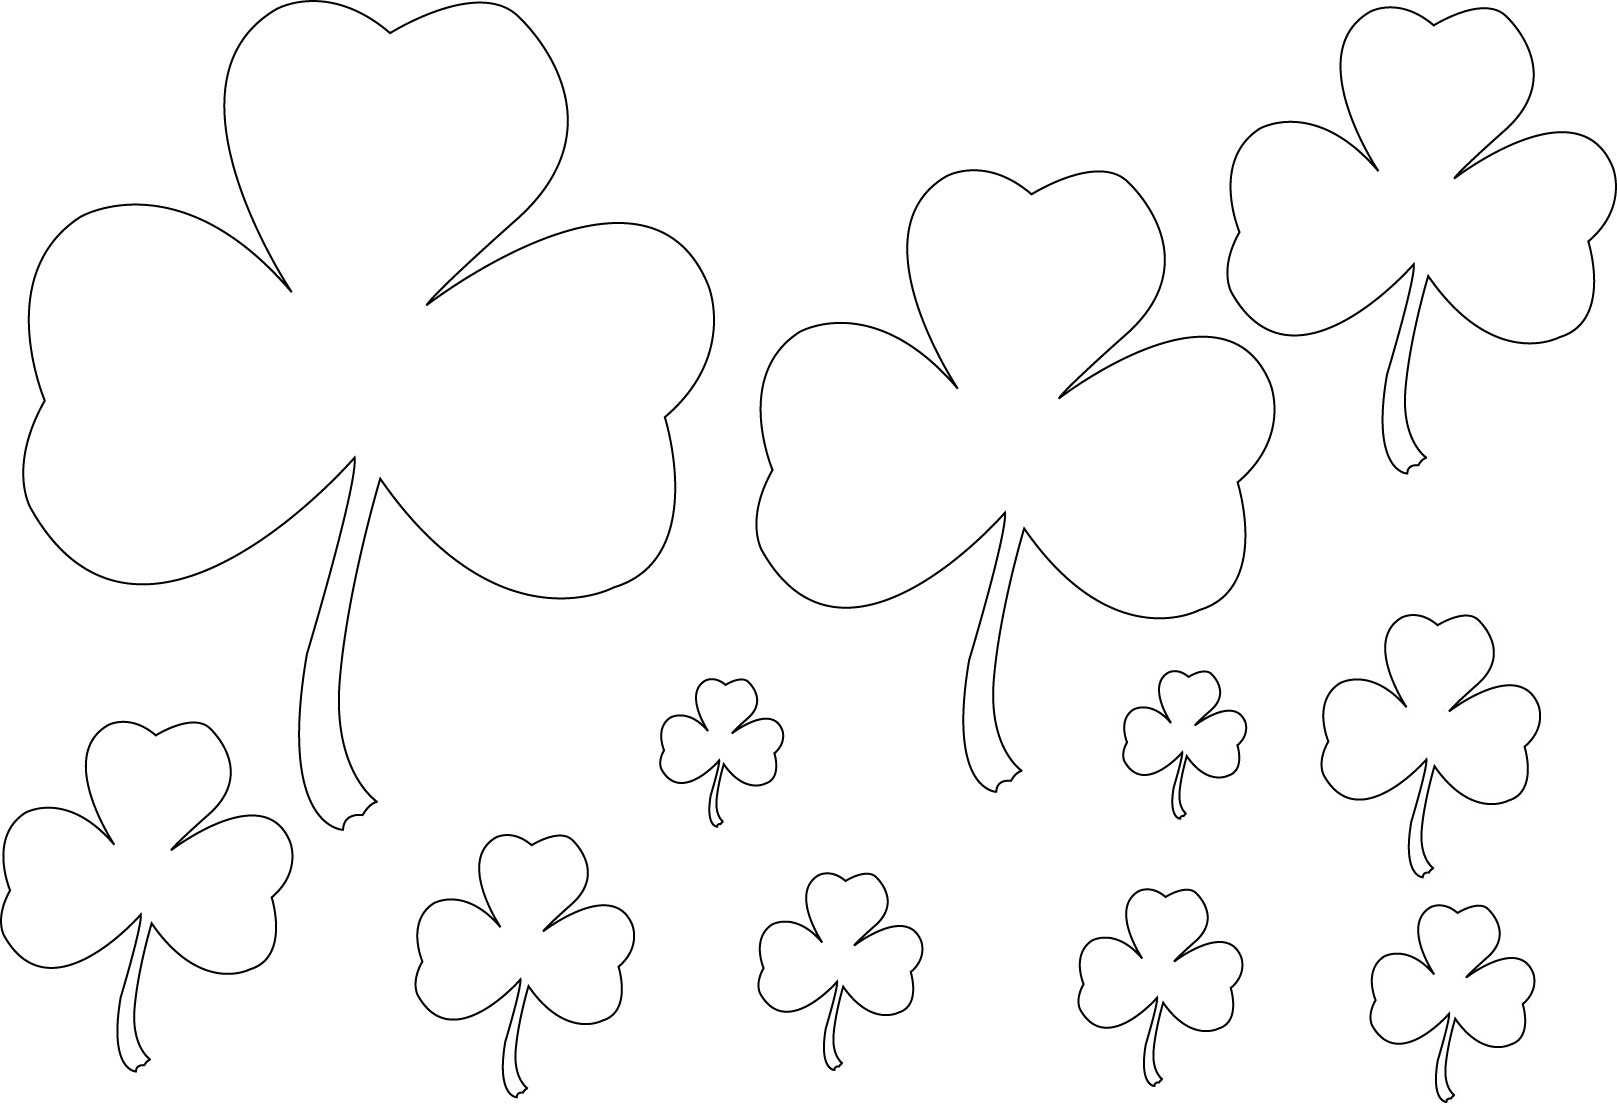 Coloring Pages To Prit Of Shamrocks 5